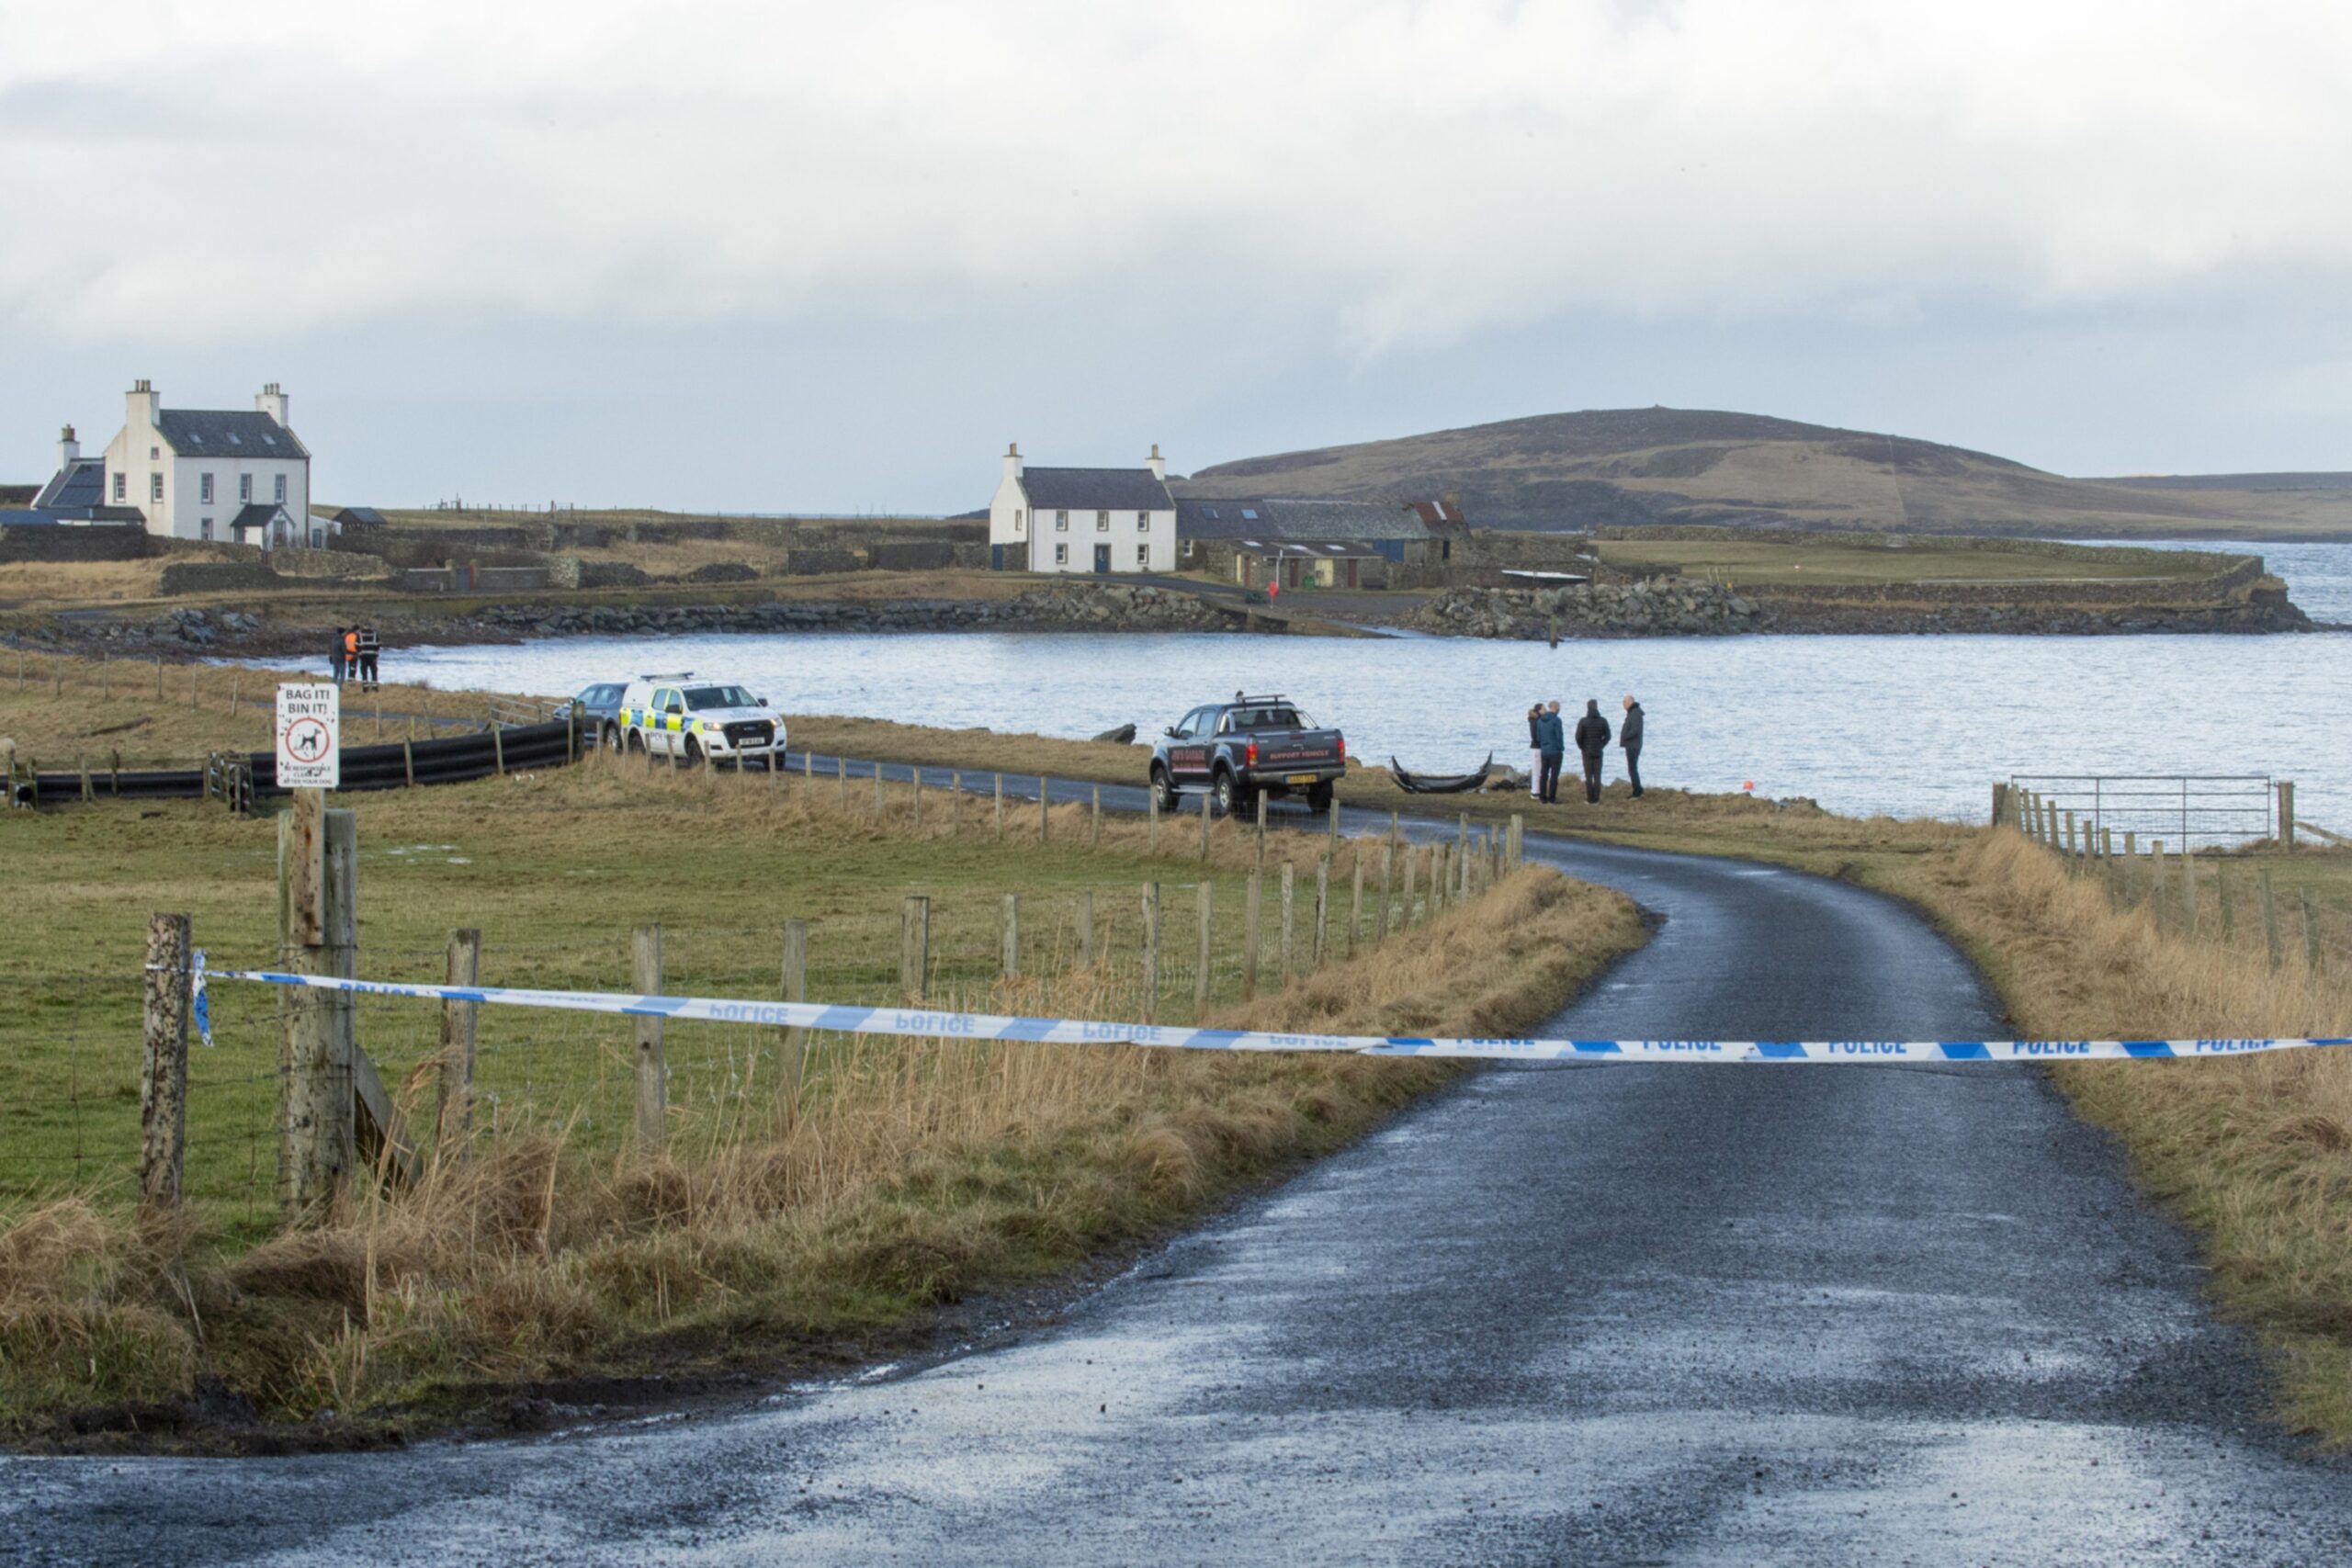 Car parts can been seen by the roadside as police investigate Claire Leveque's death.